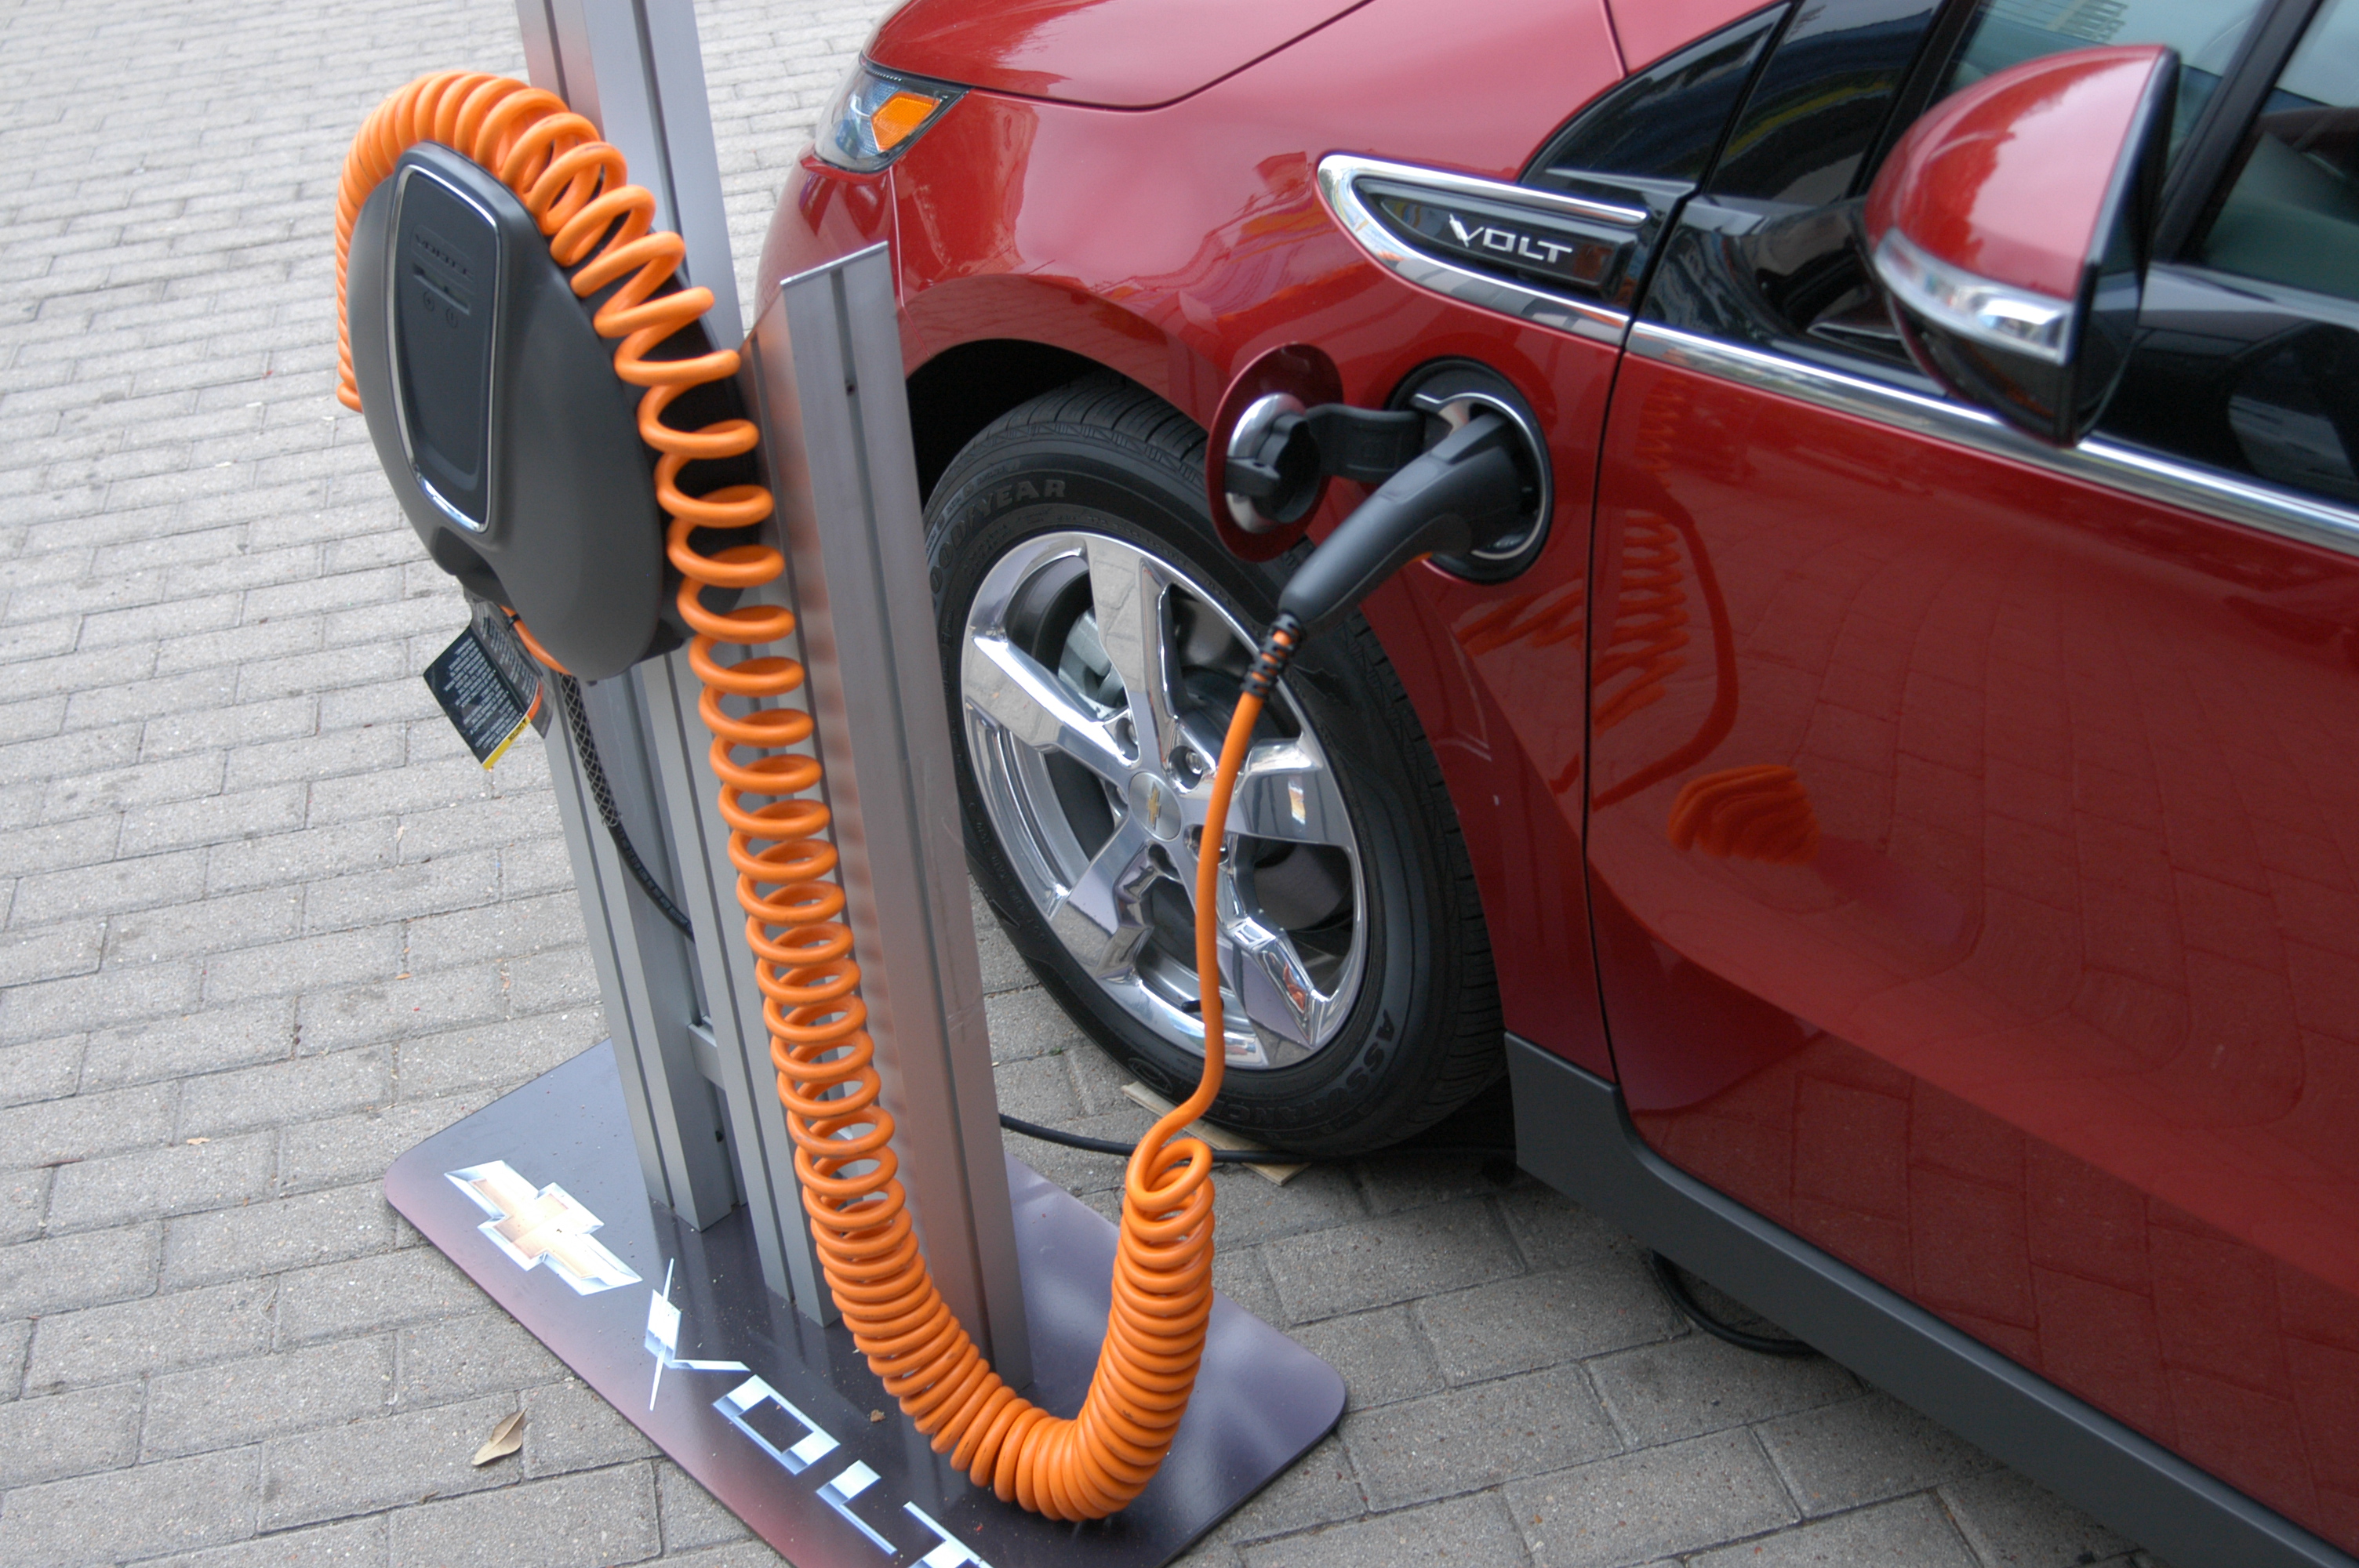 austin-energy-issuing-rebates-for-electric-car-charging-stations-kut